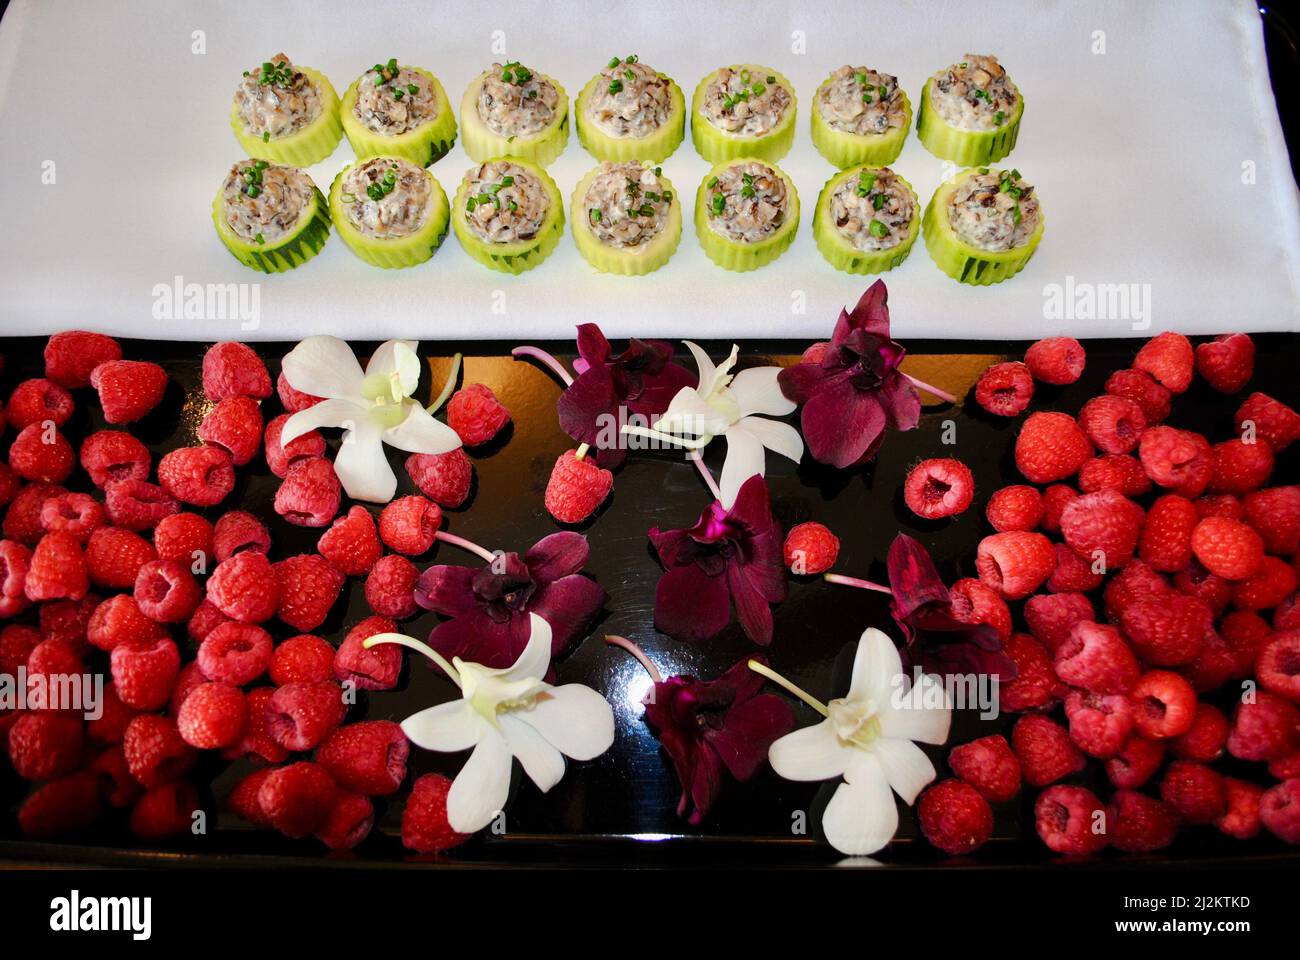 Cucumber cups filled with wild mushroom salad on tray decorated with raspberries and orchids Stock Photo